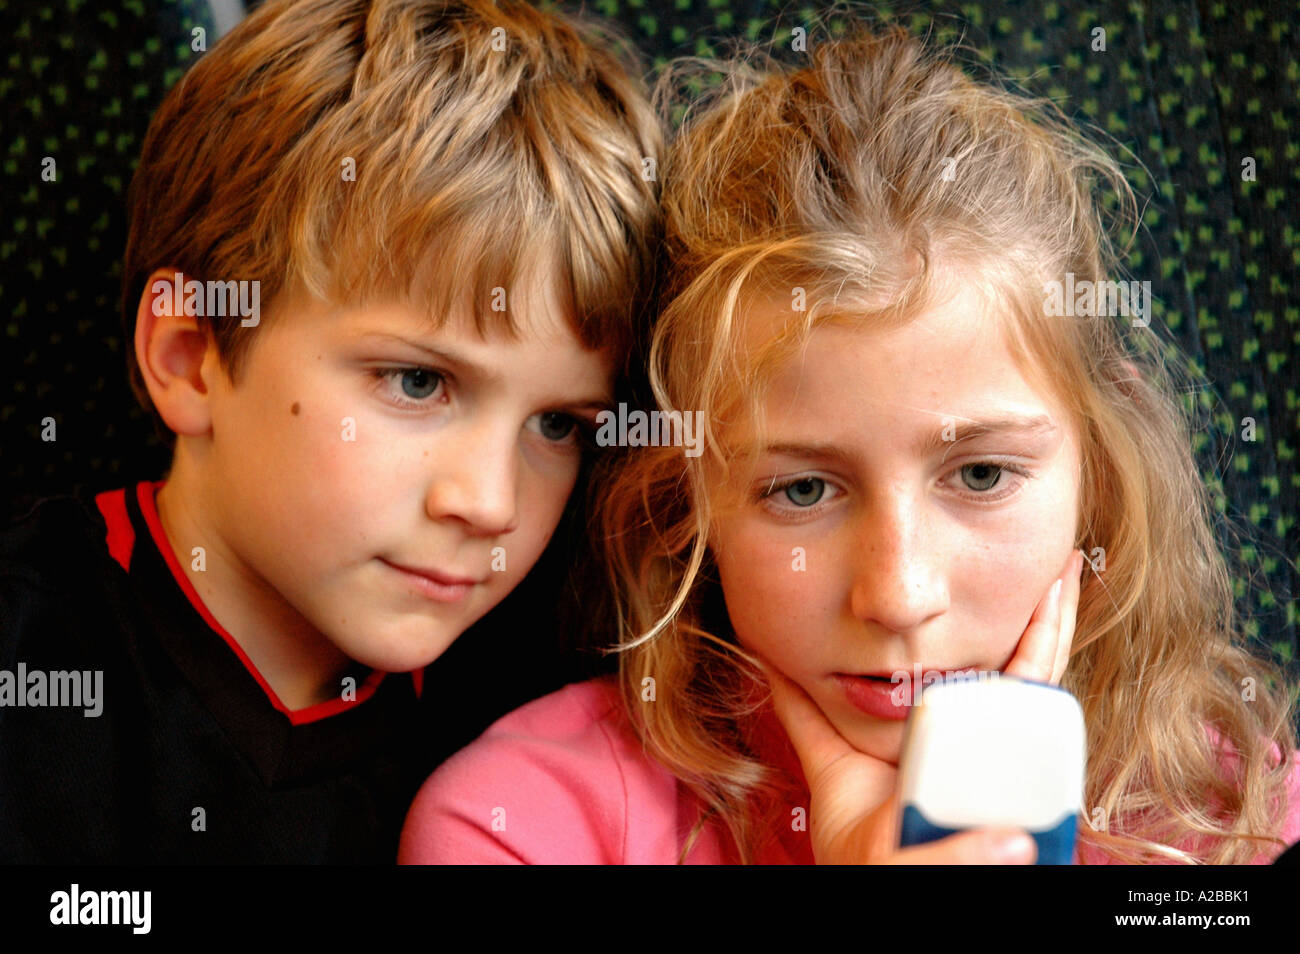 children playing games on a mobile phone Stock Photo